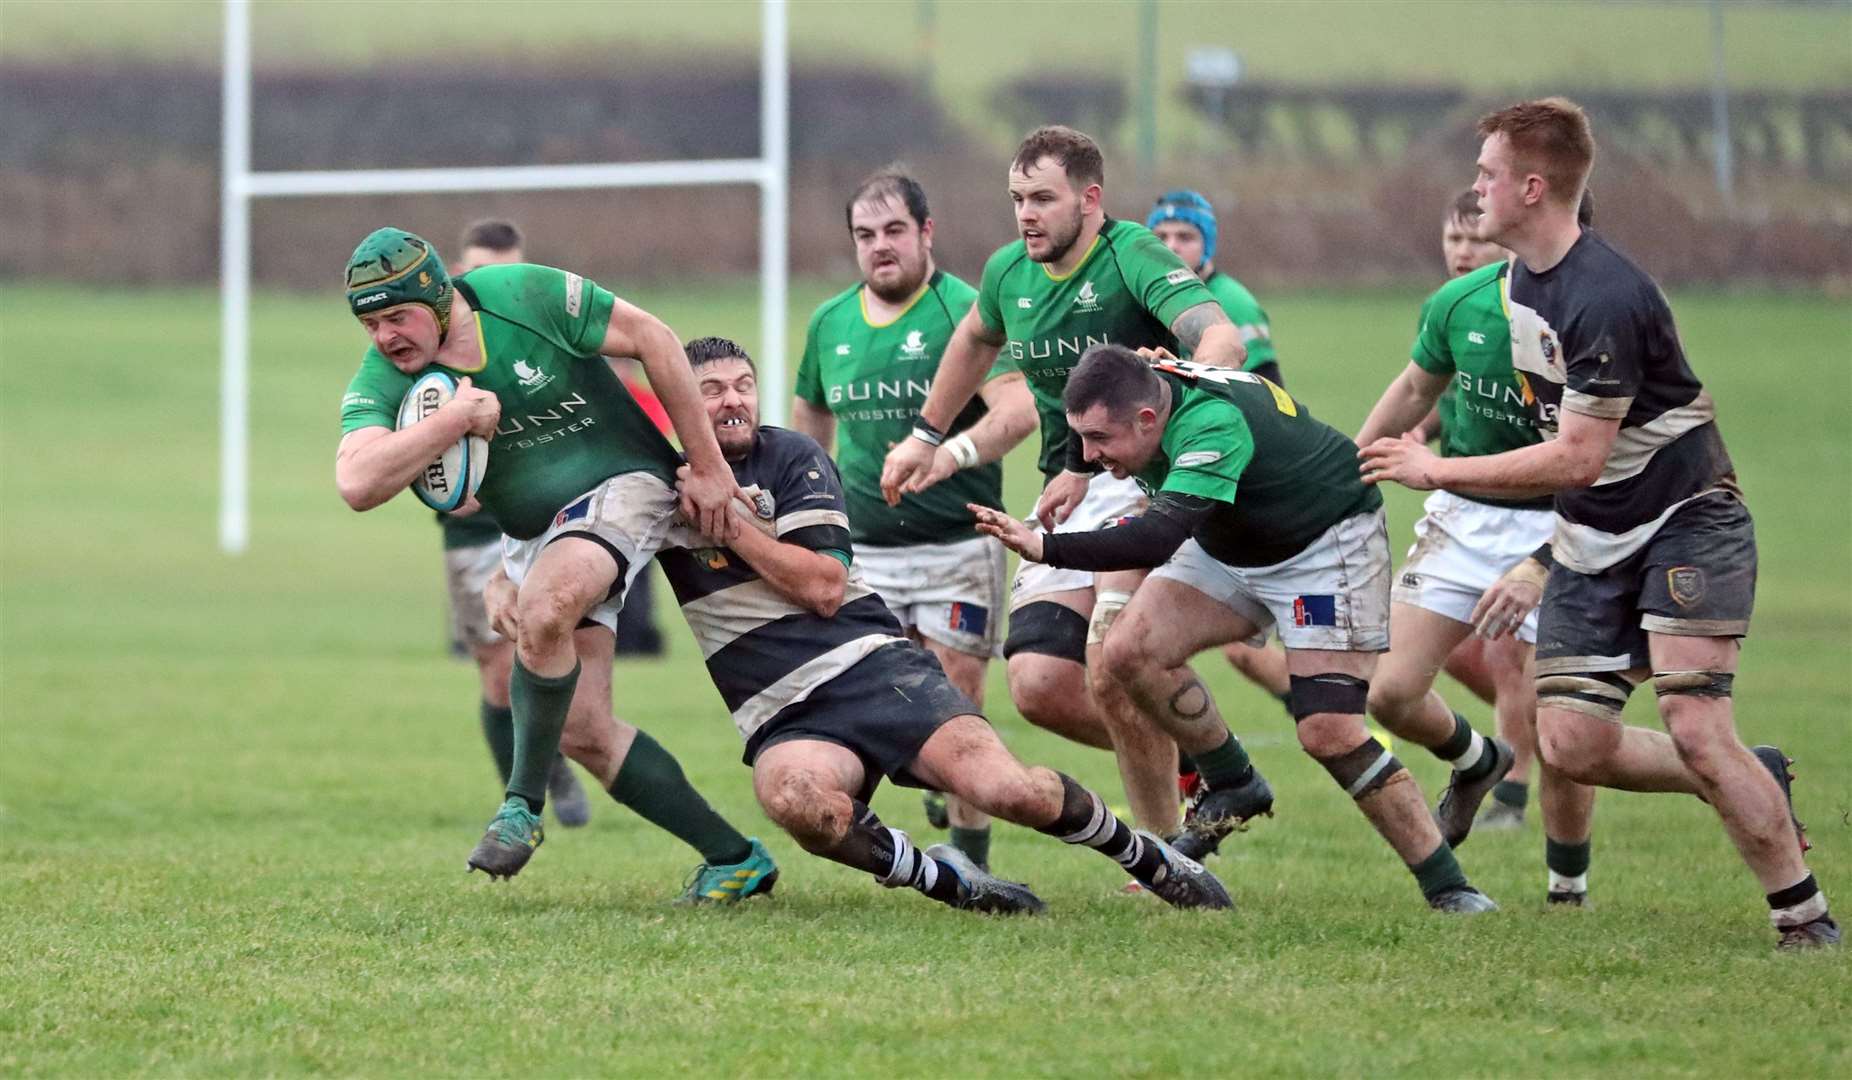 Caithness' Hamish Coghill in action earlier this season. The Greens man was one the Millbank side's two try scorers in last week's 78-10 loss at Howe of Fife. Picture: James Gunn